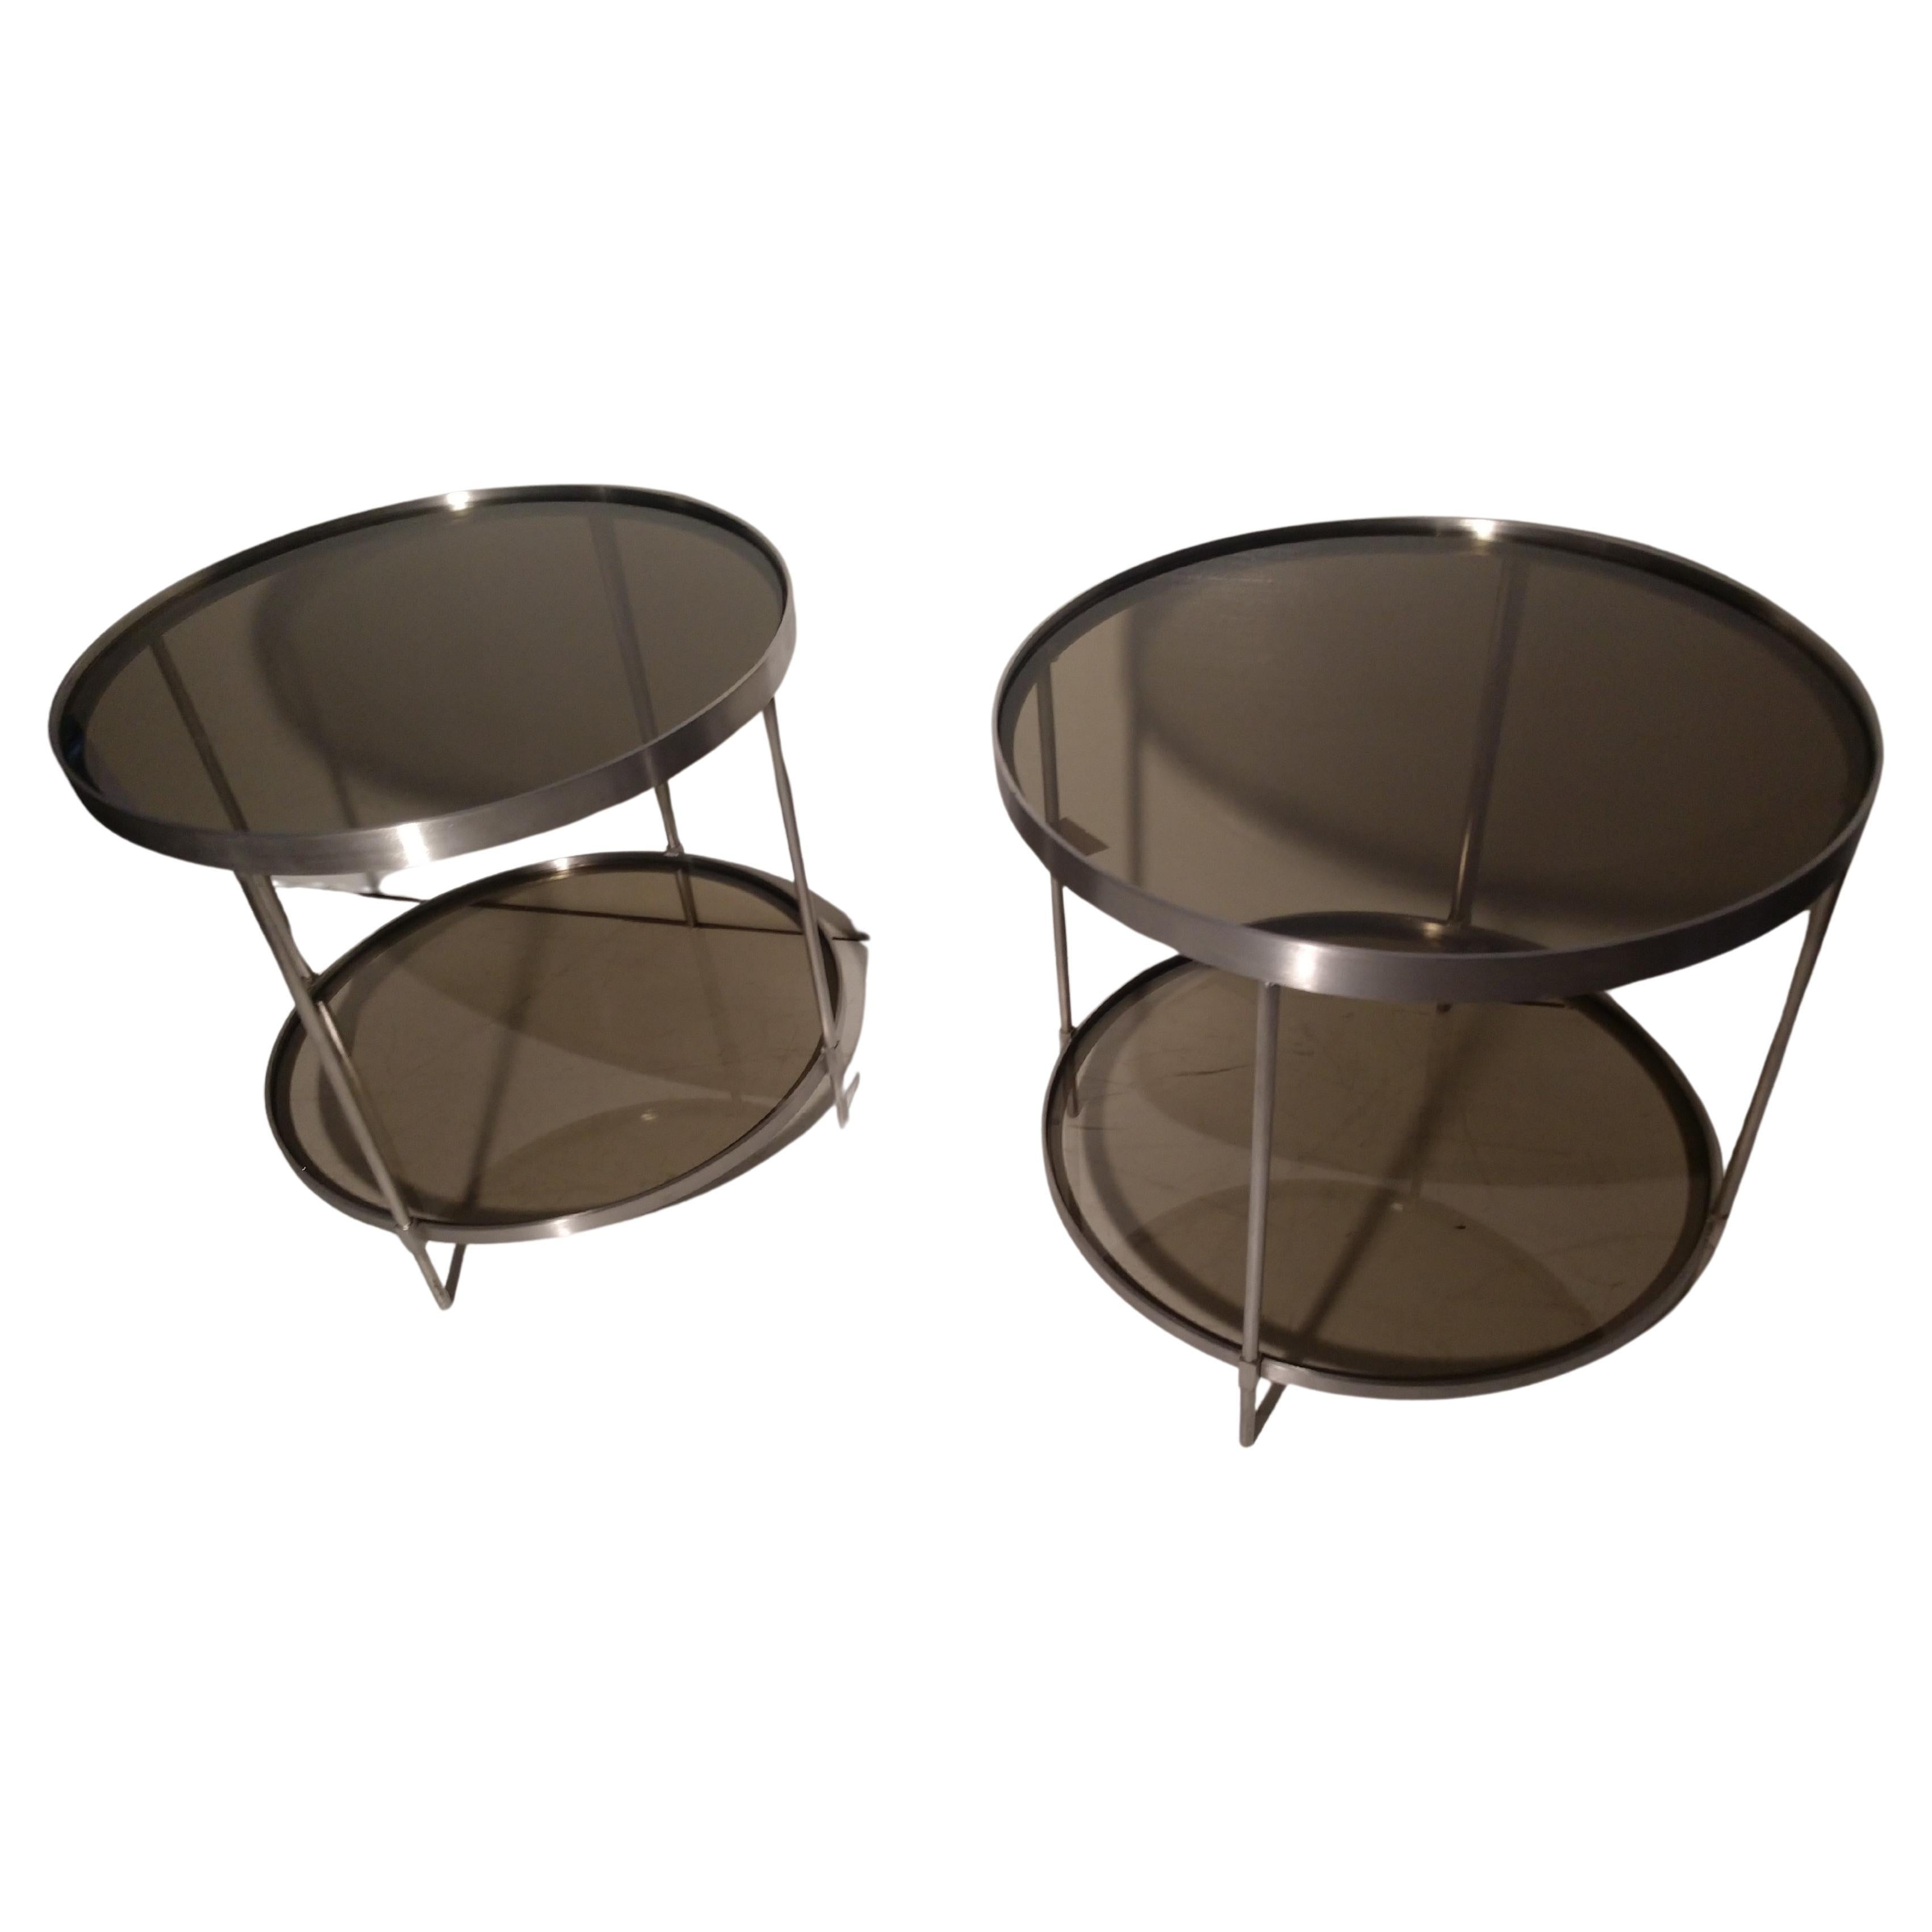 Fabulous pair of stainless steel tables with smoked glass top and bottom shelf. Tables are large 24in. diameter so they can be used as a cocktail table in a smaller setting by themselves, or together if the space works.
In excellent vintage